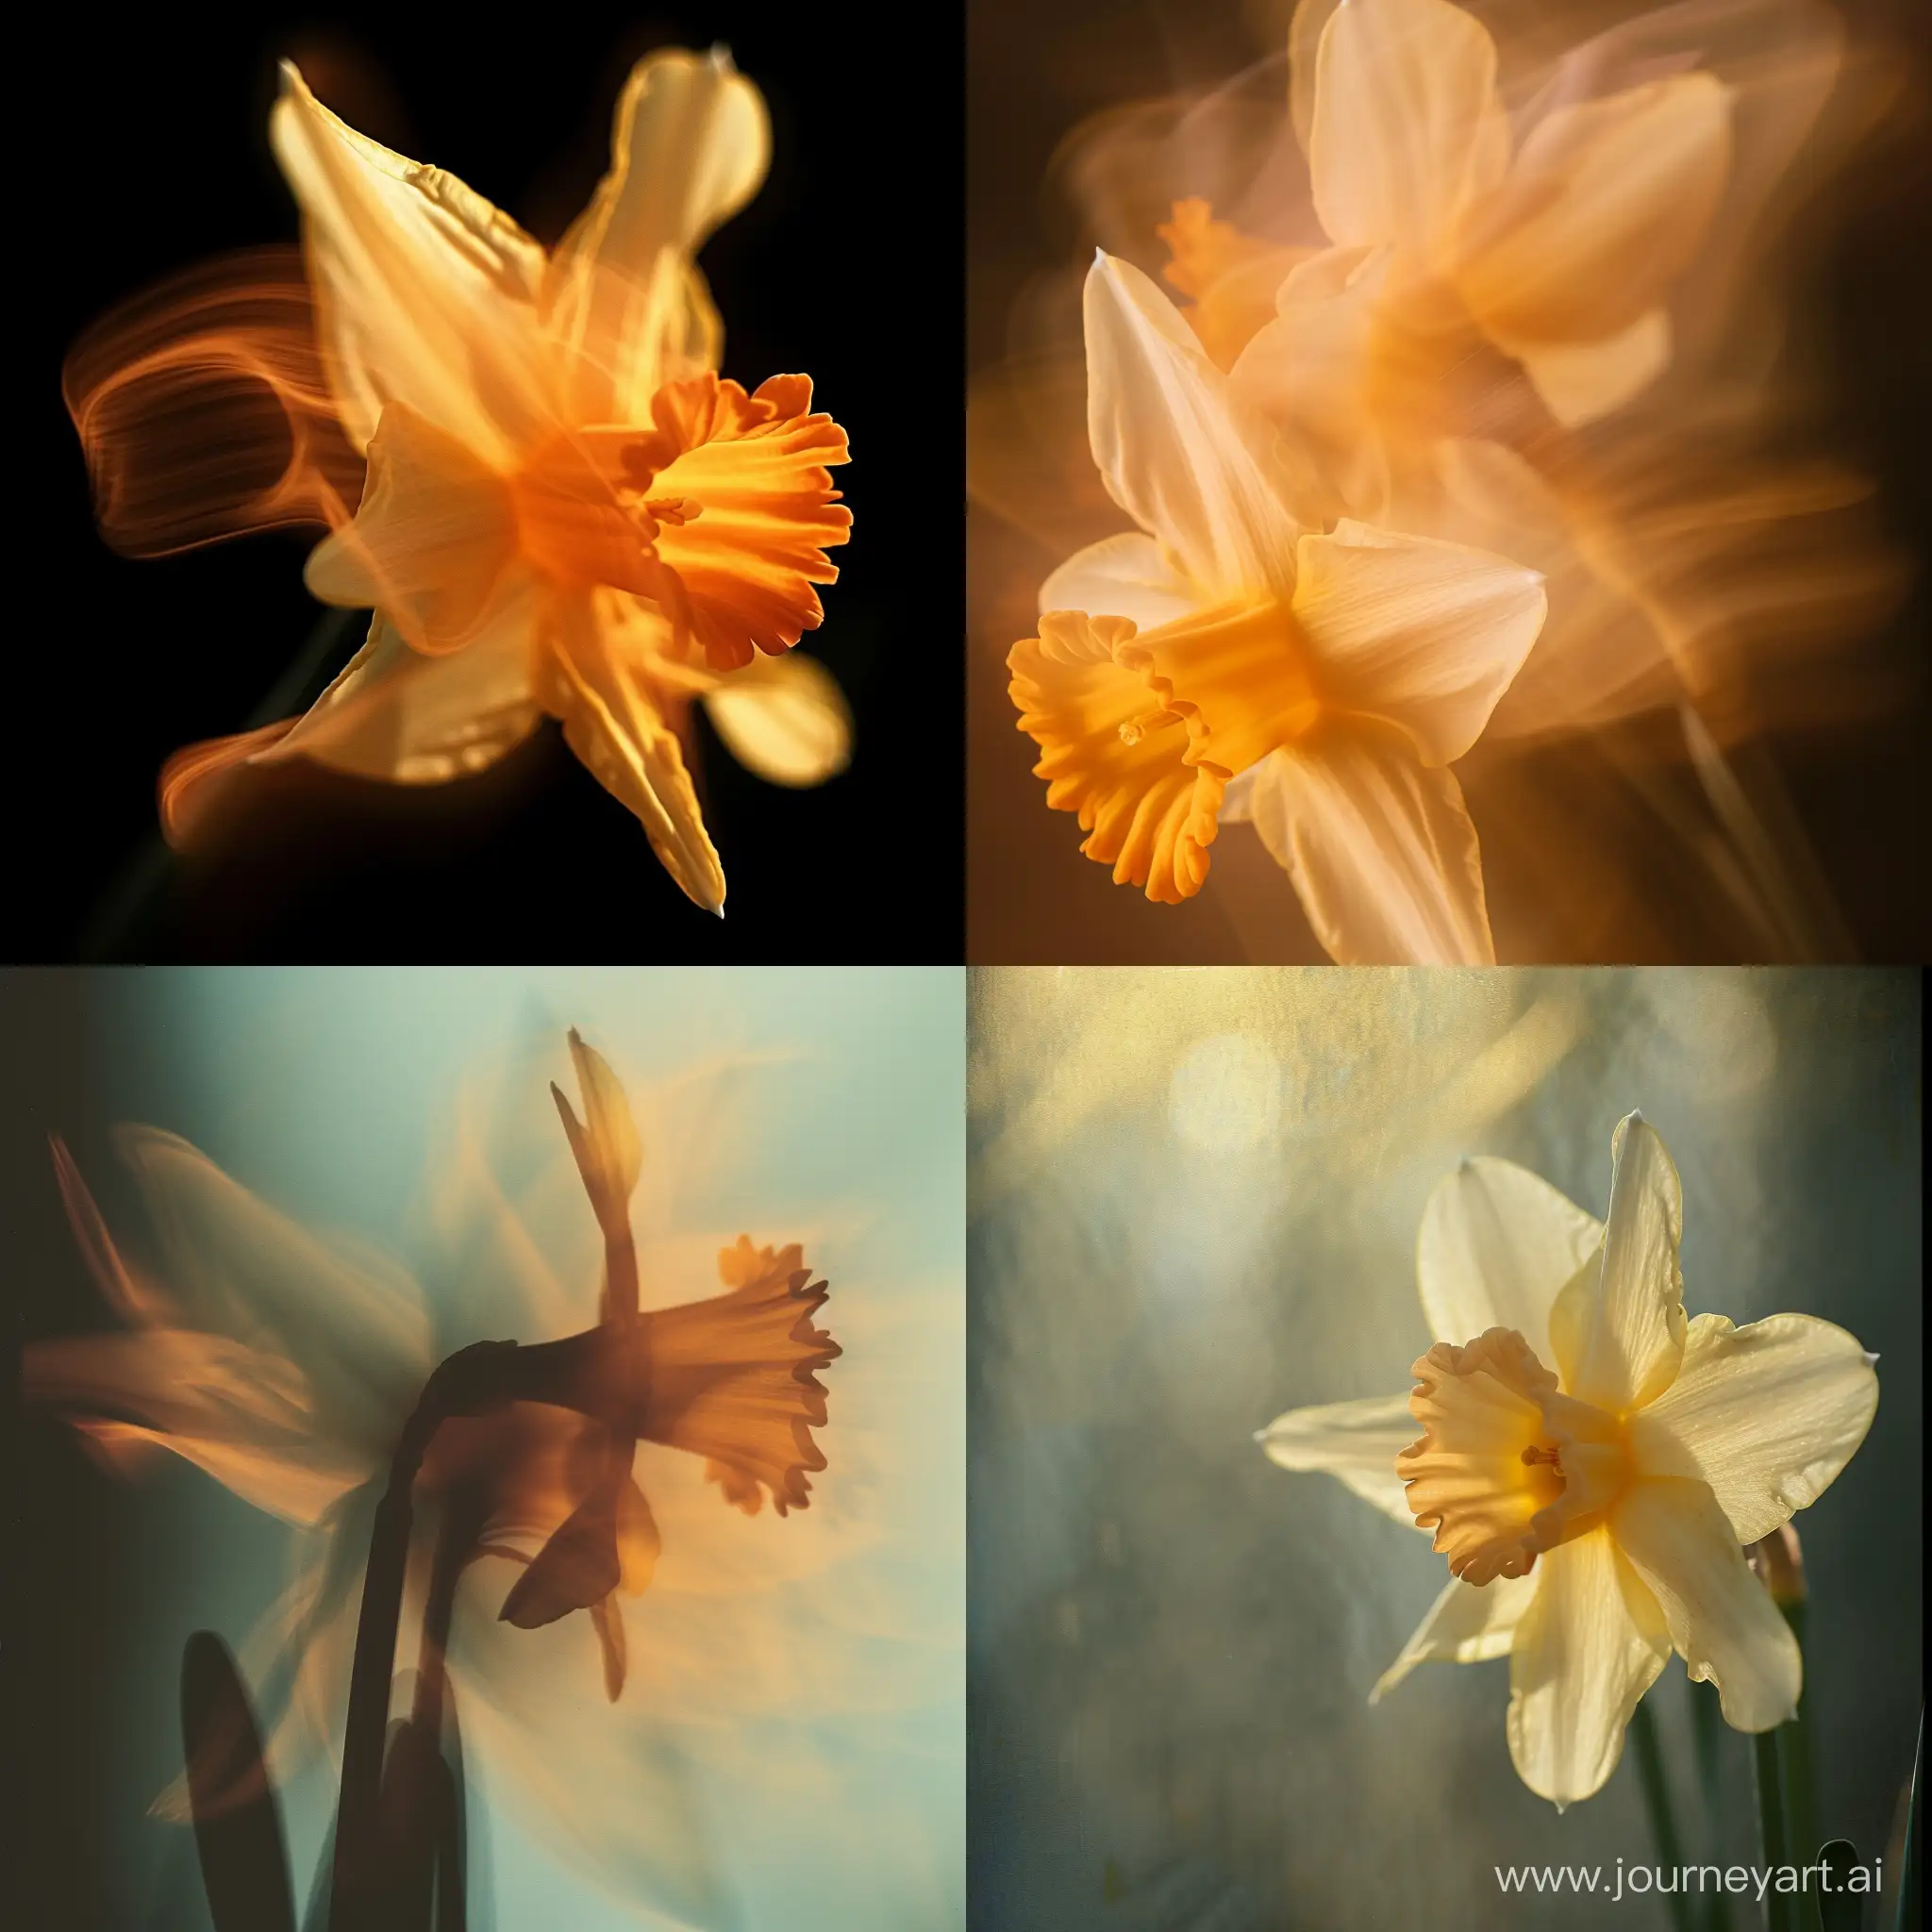 Microscope lens, macro nature photography, daffodil flower, beautiful, abstract, lens blurred silhouette, variegated texture,